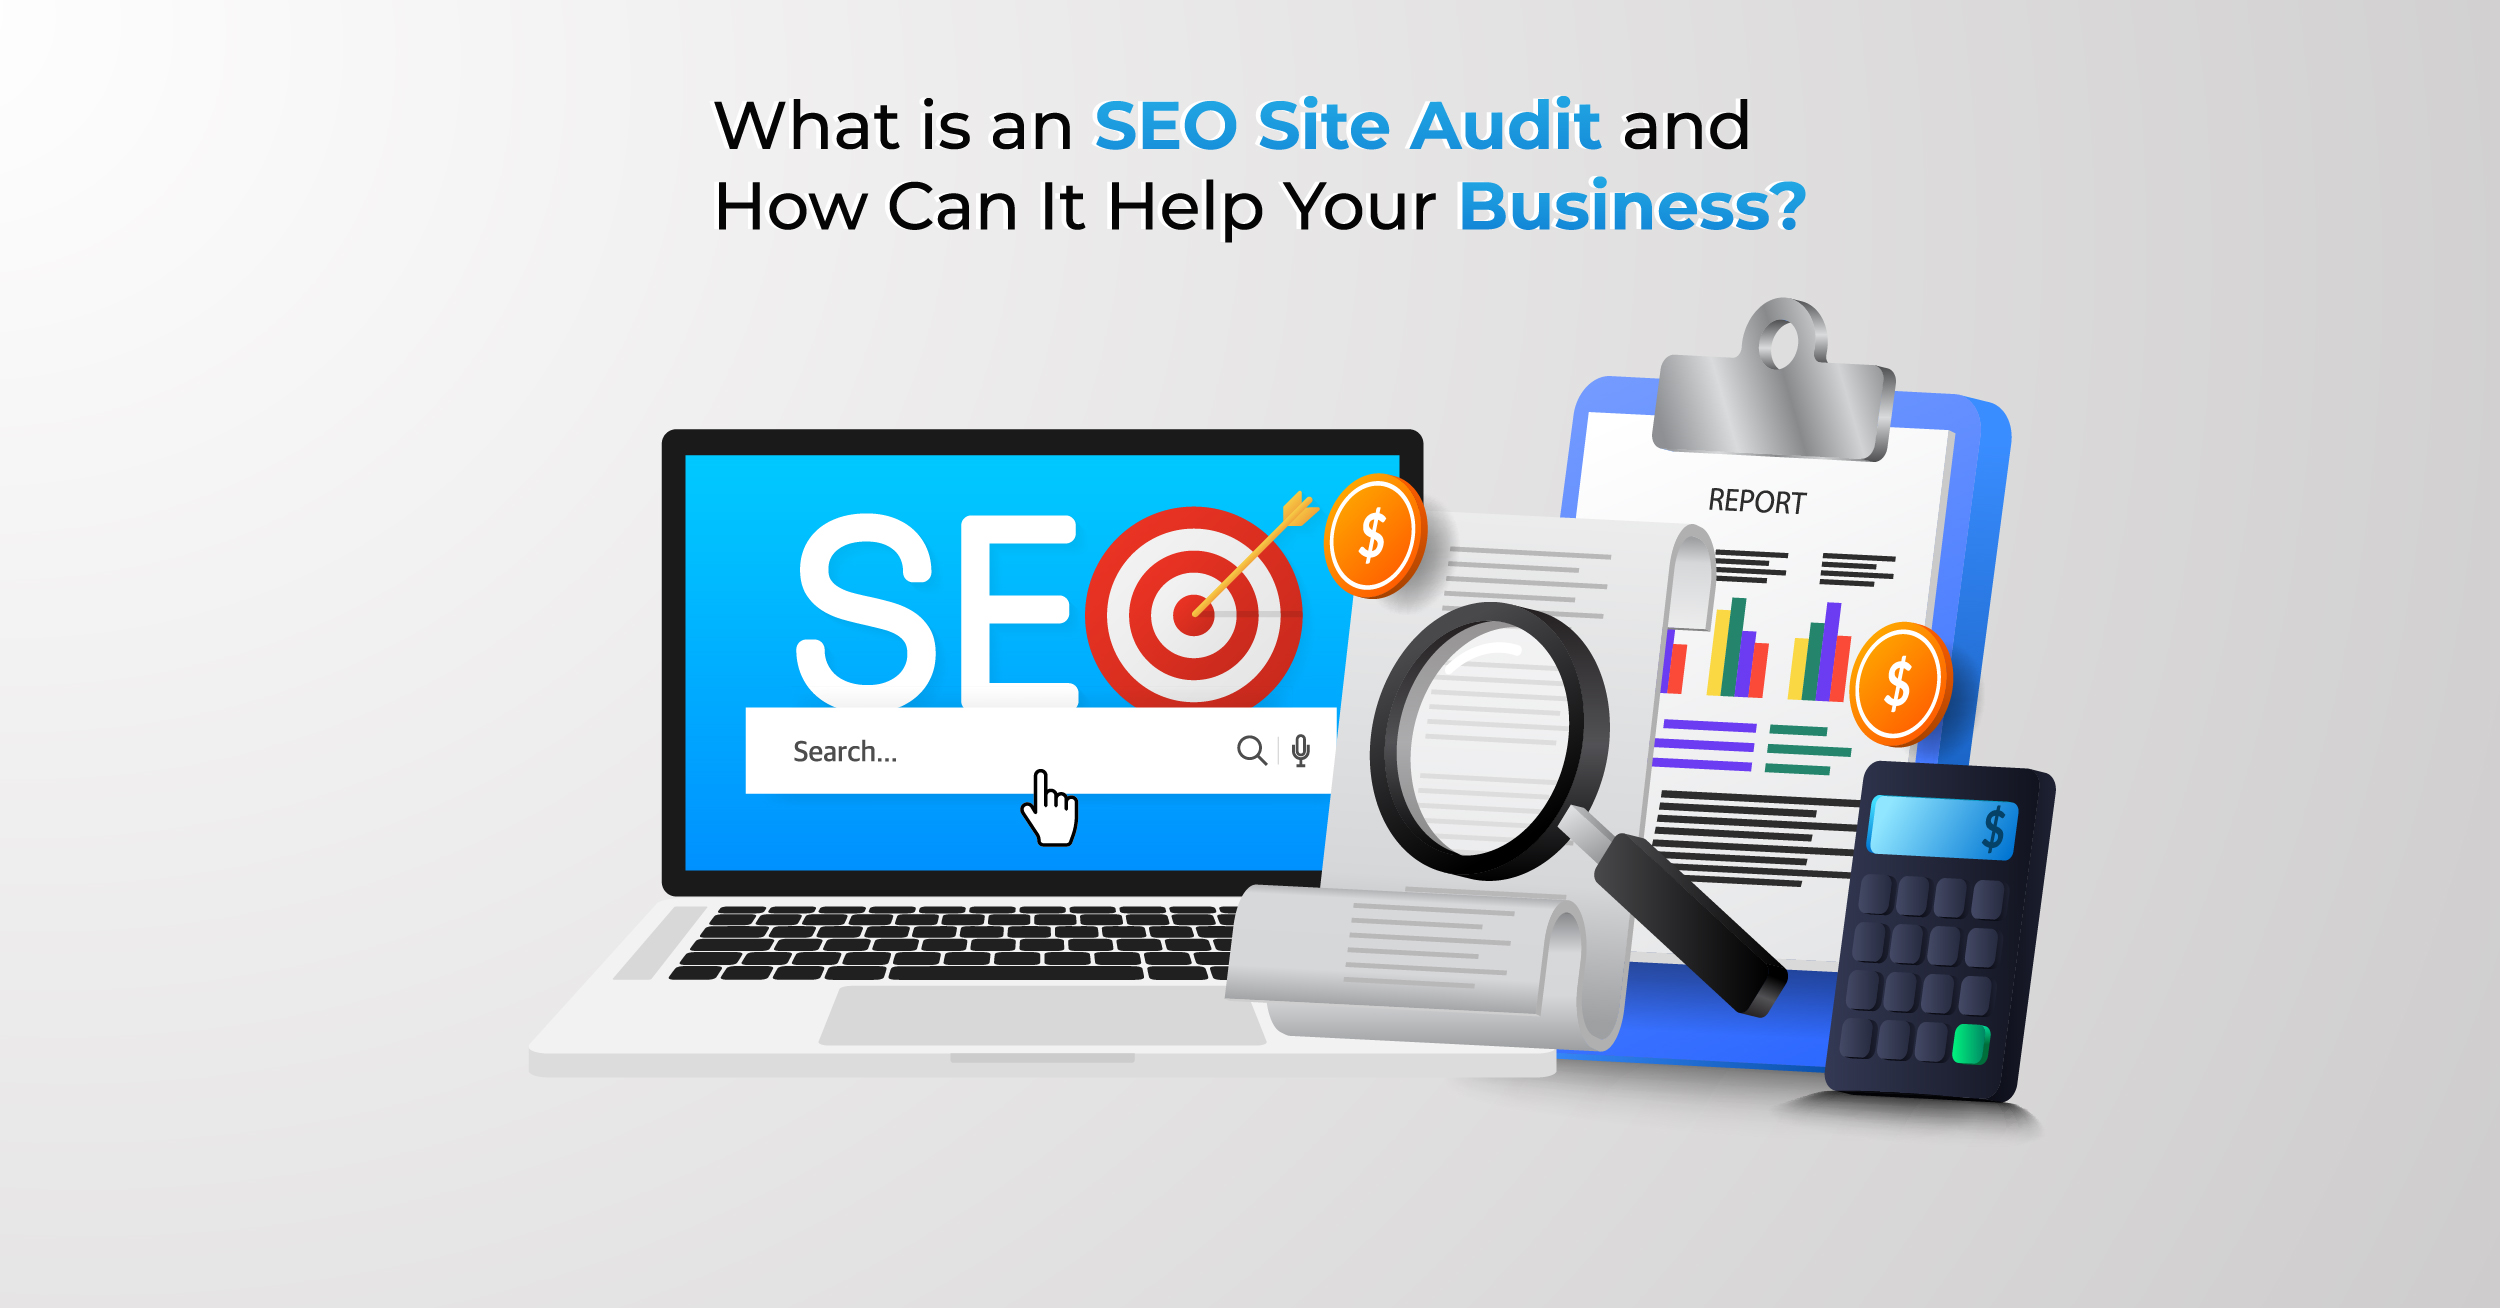 What is an SEO Site Audit and How Can It Help Your Business?